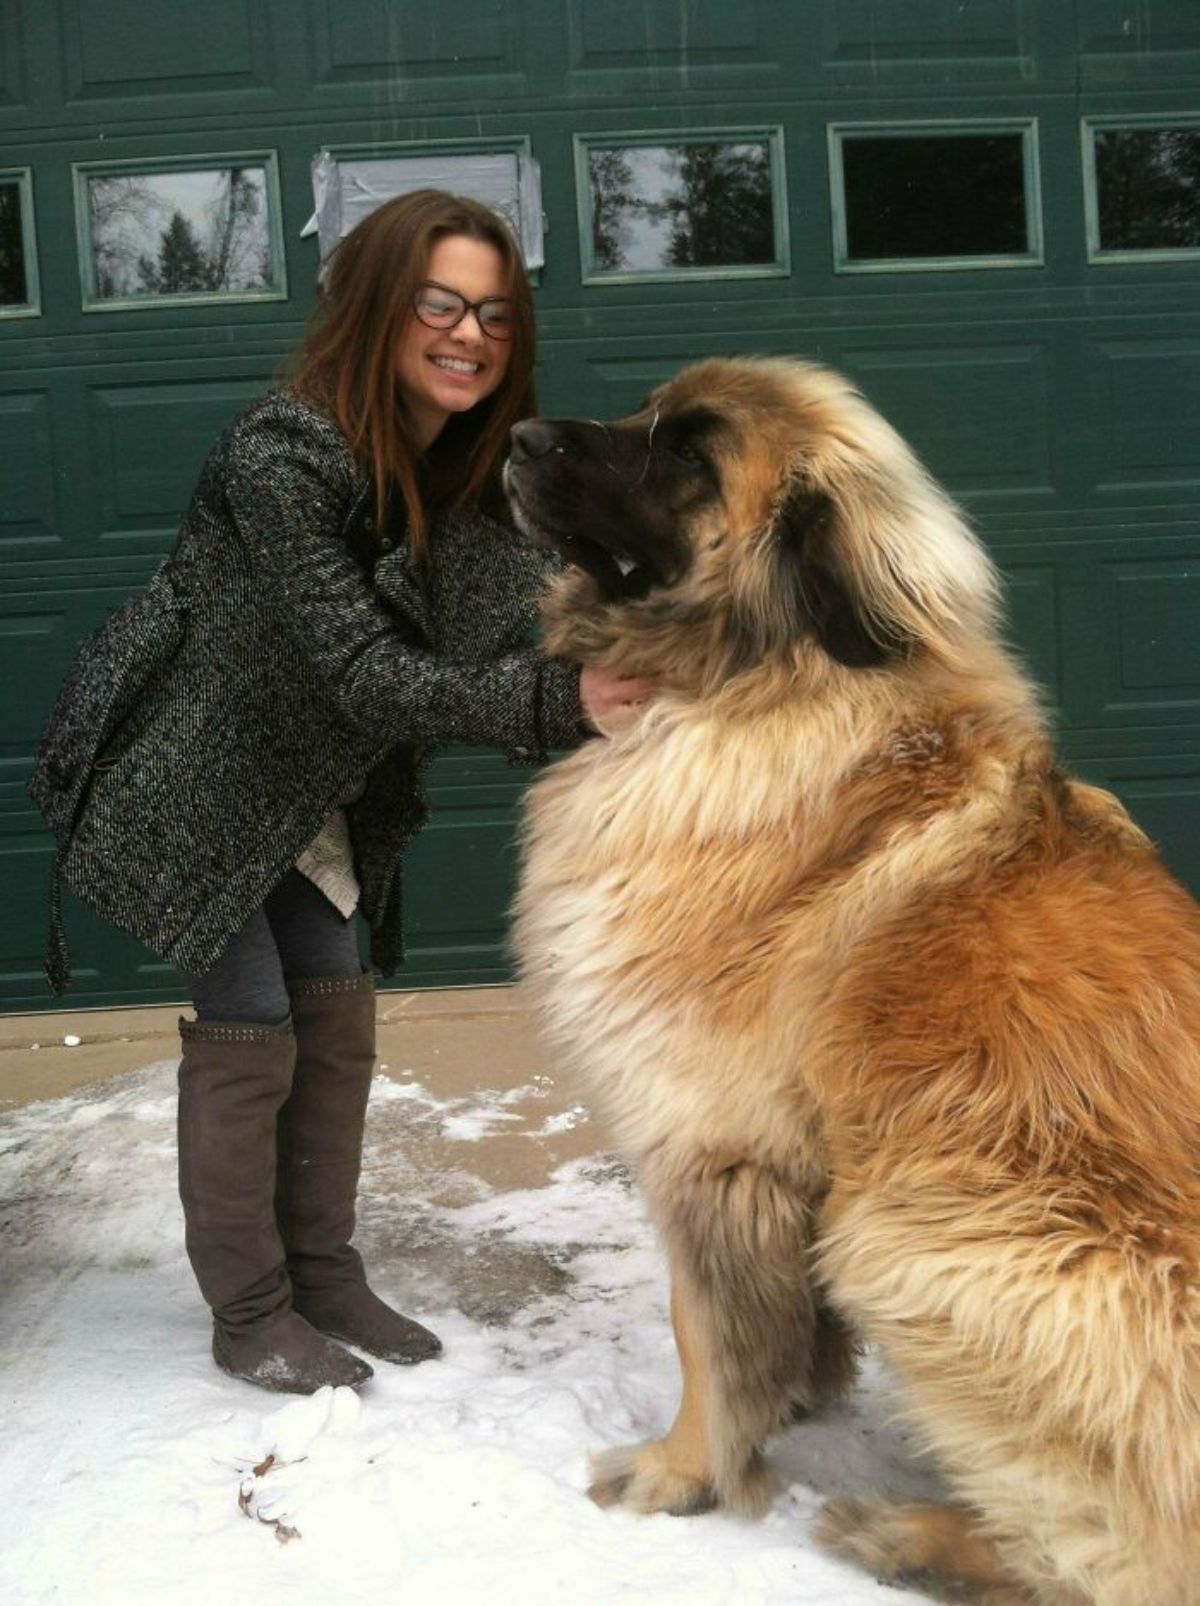 large fluffy brown dog being petted by a woman